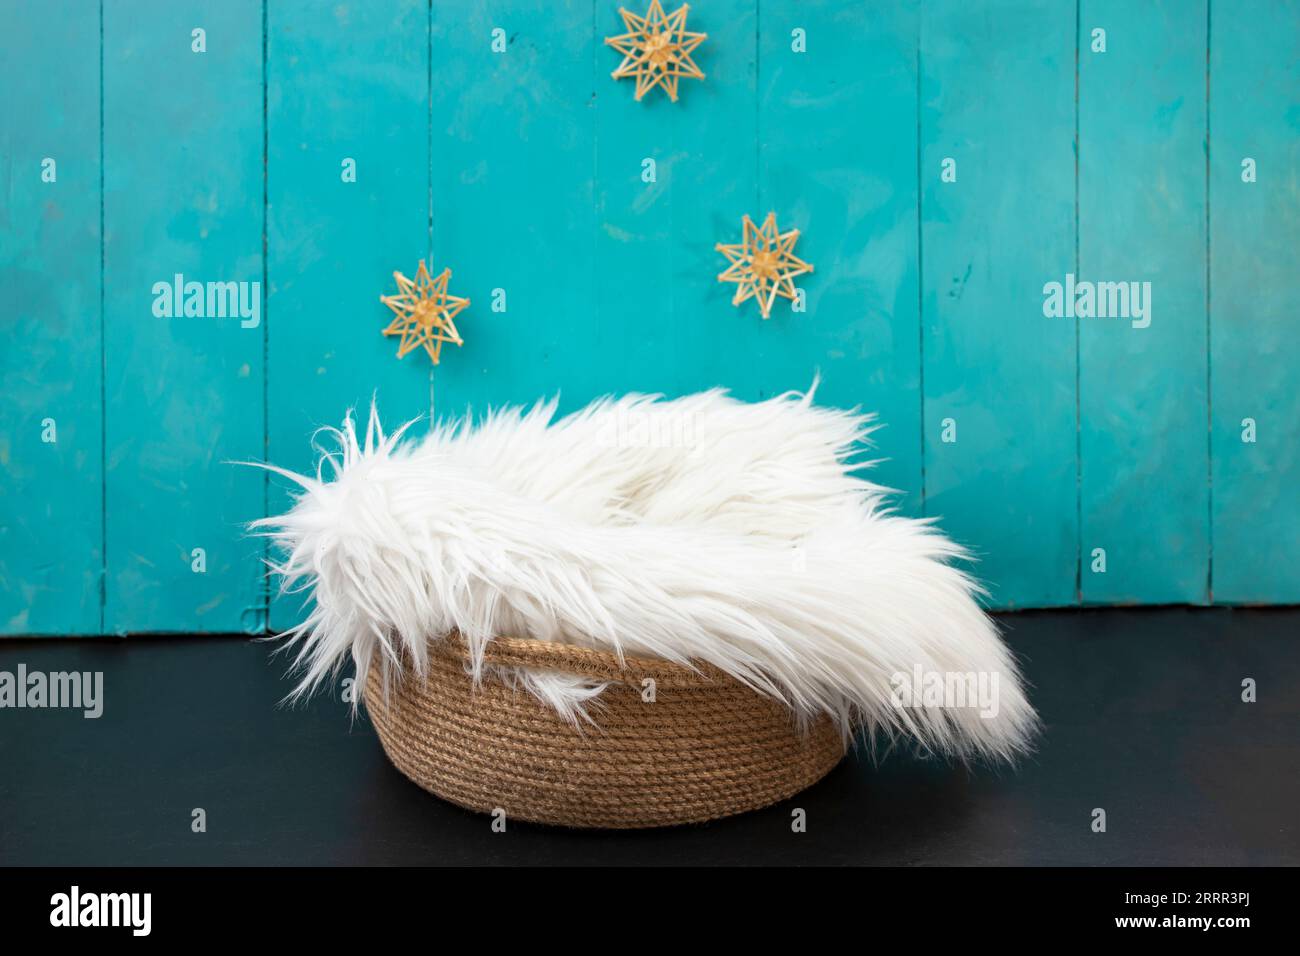 New born or baby portrait photography backdrop with white fur, straw snowflakes, jute rope basket and blue painted wood boards Stock Photo